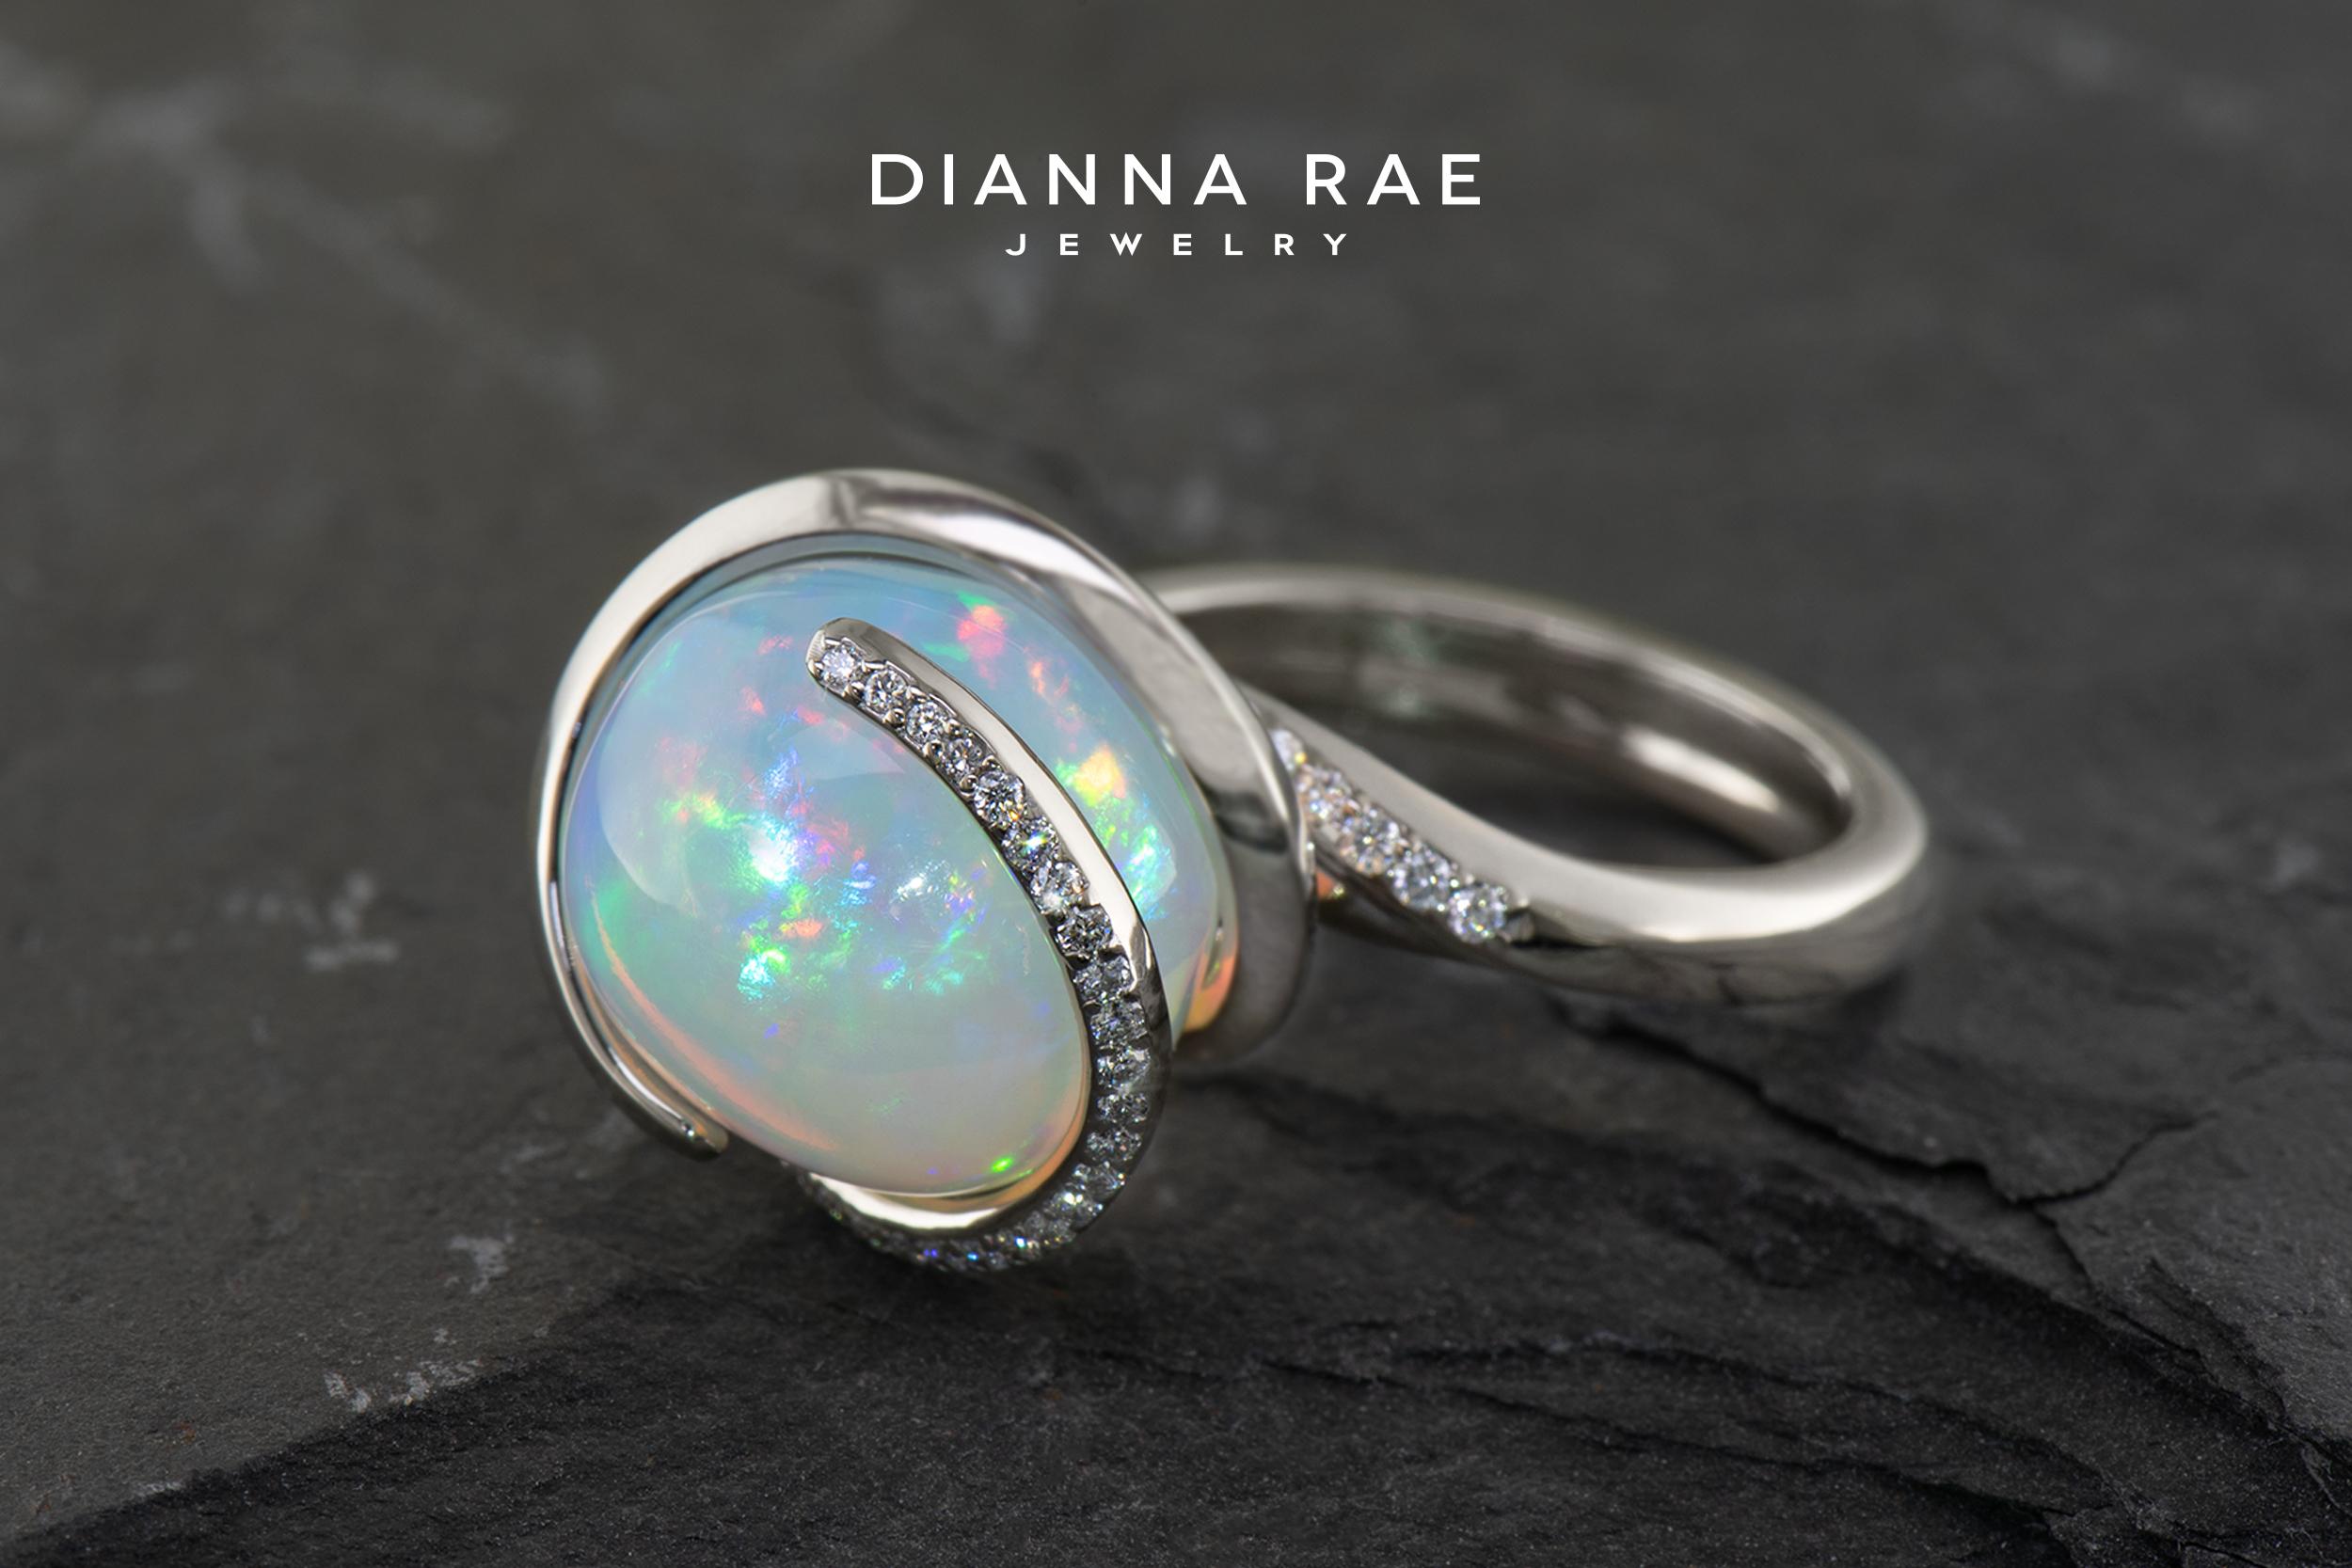 Awarded 2018 Overall Winner at Jeweler's of Louisiana Convention for Custom Jewelry Design! A stunning new addition to the Dianna Rae Original collection, the “Opal Orb”, is a bold and brilliant piece. This unique cocktail ring features an